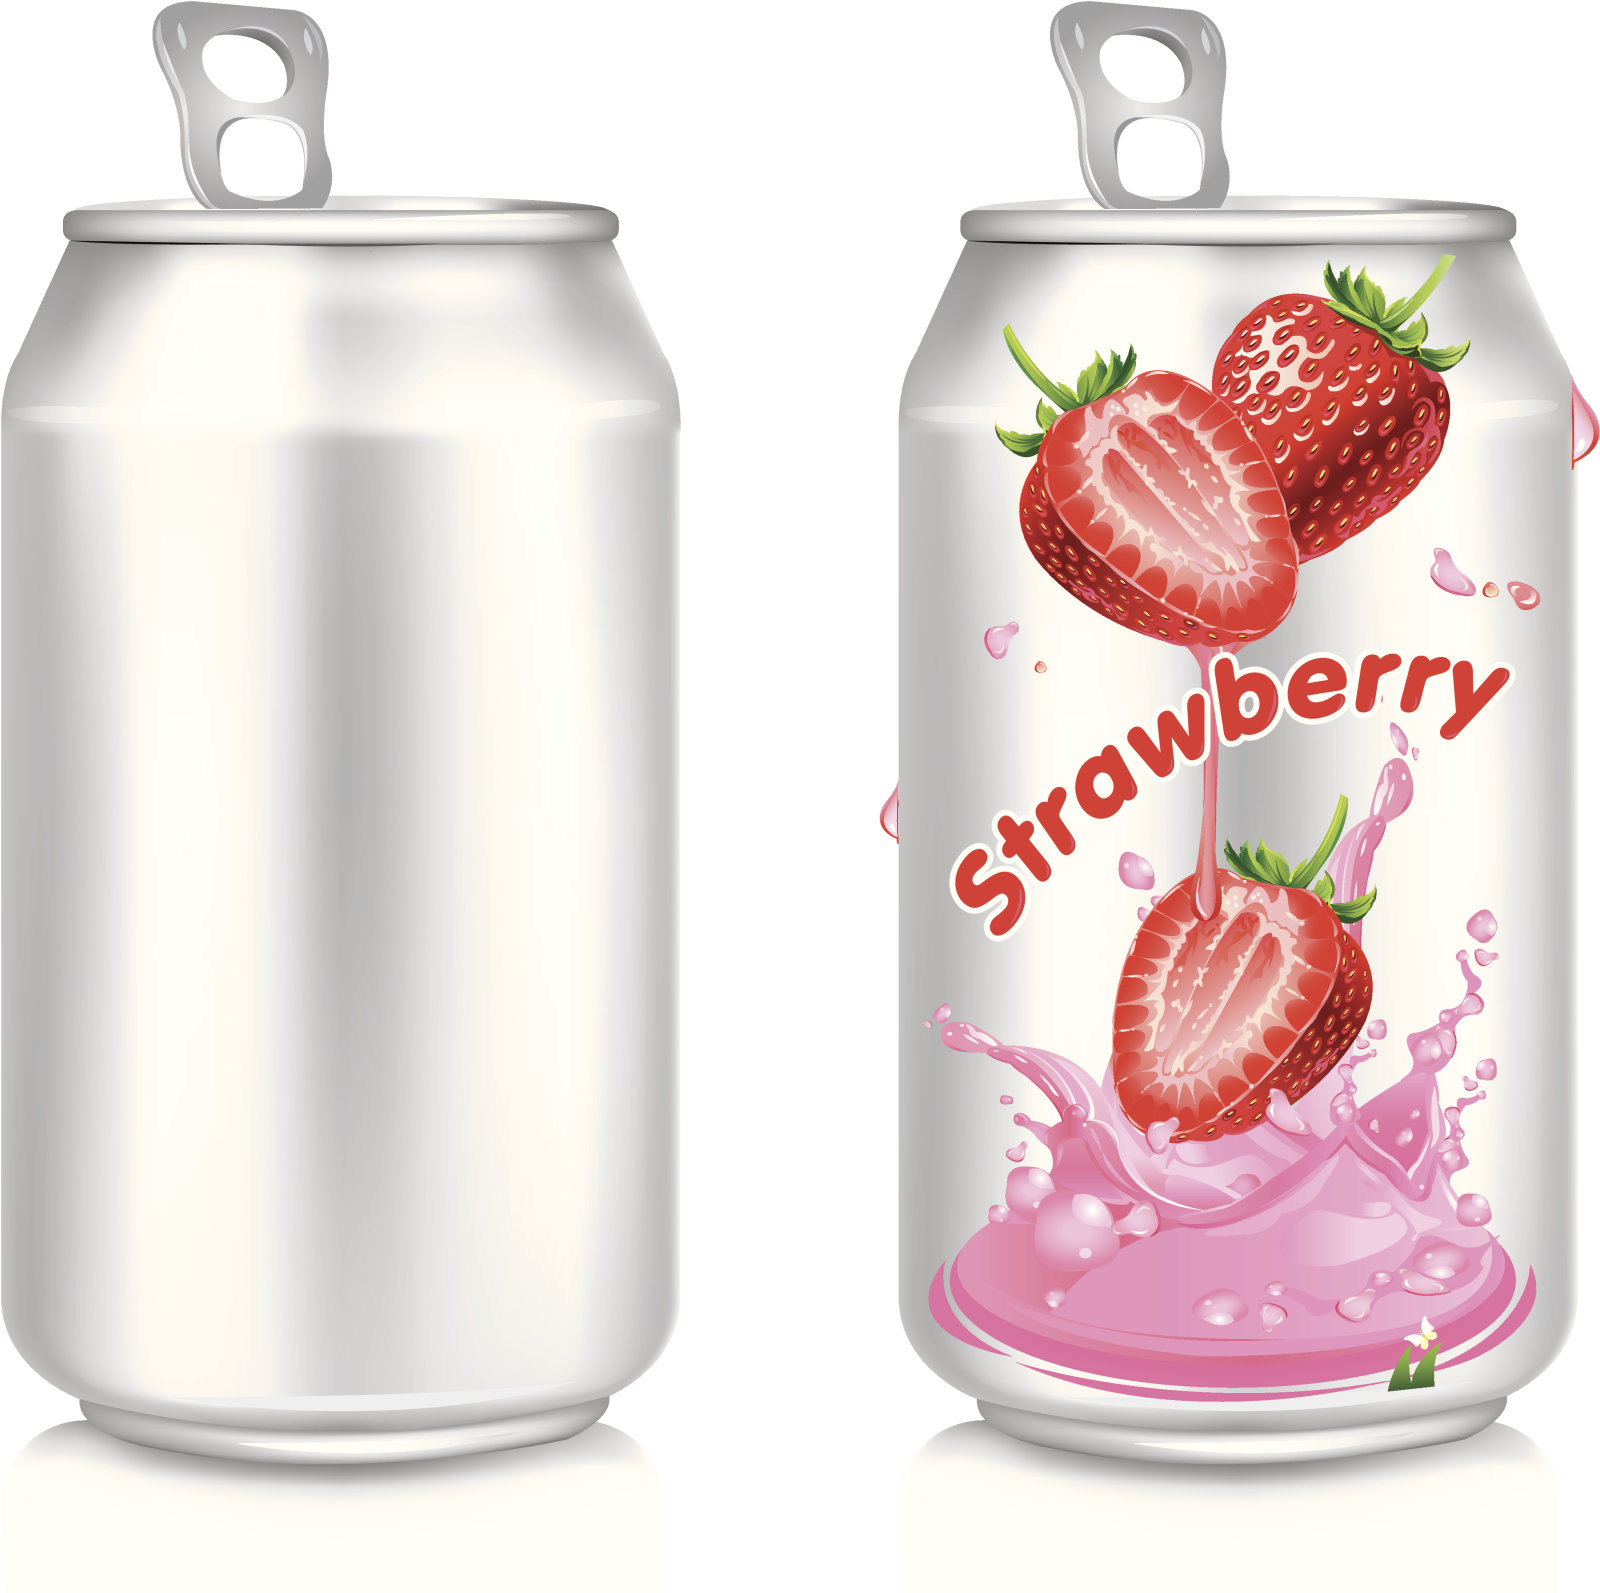  Round Shape Beverage Aluminum Drinking Open Cans 355ml STD For Juice Environmental Protection Manufactures